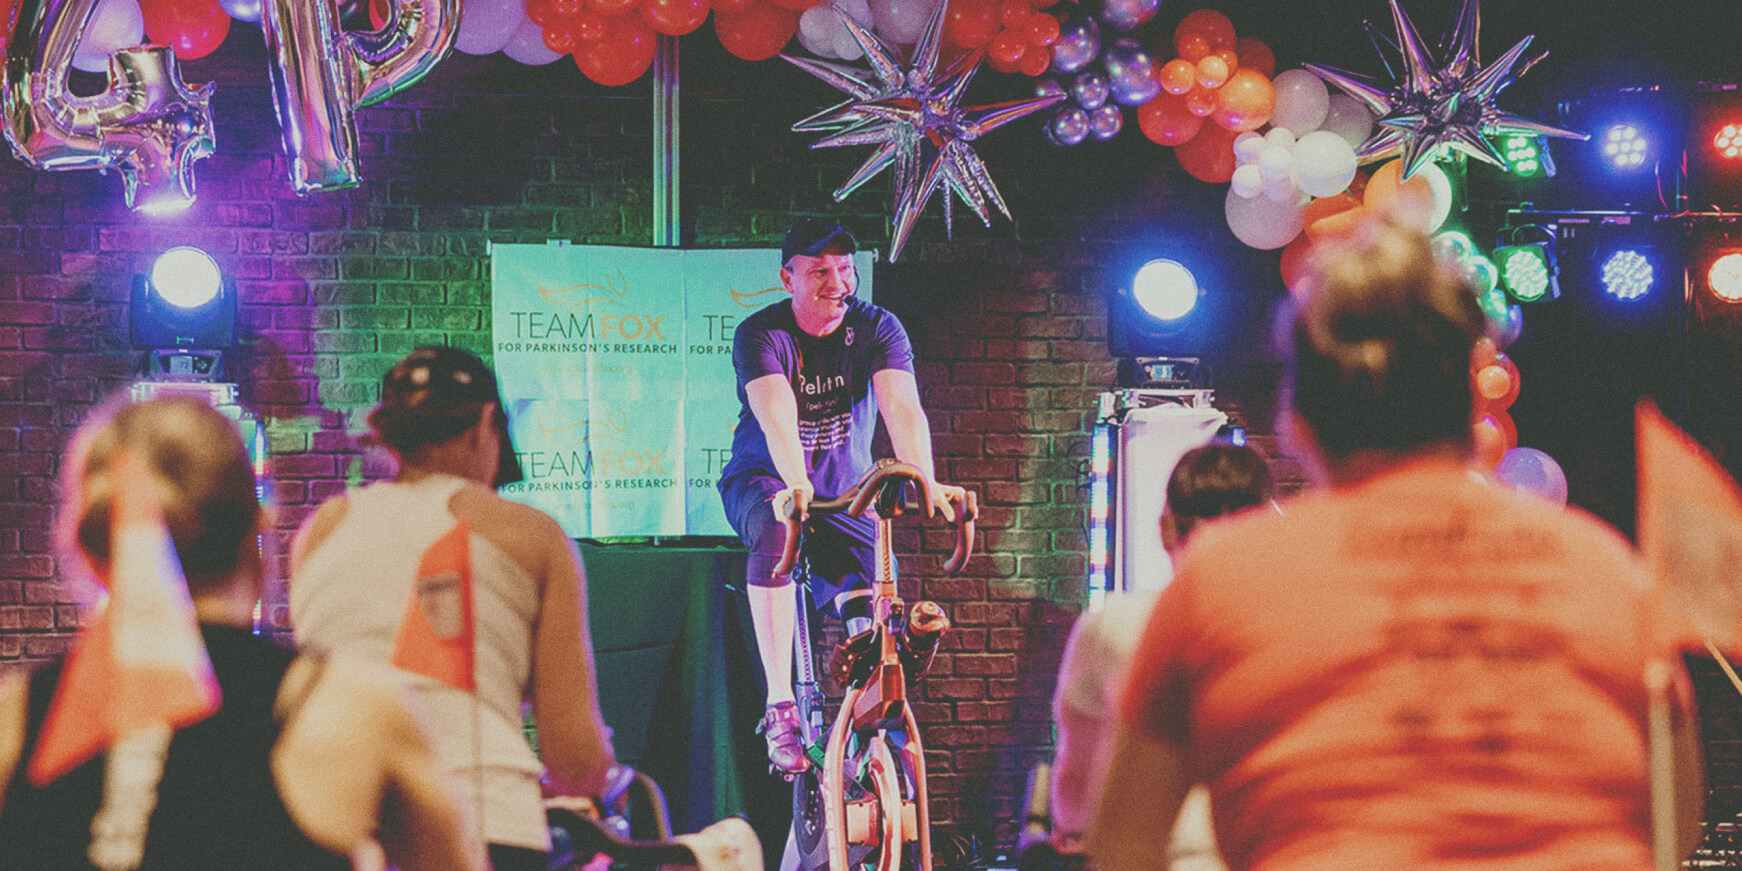 Peloton4Parkinson’s Raised 29% More at Annual Event With Classy Live